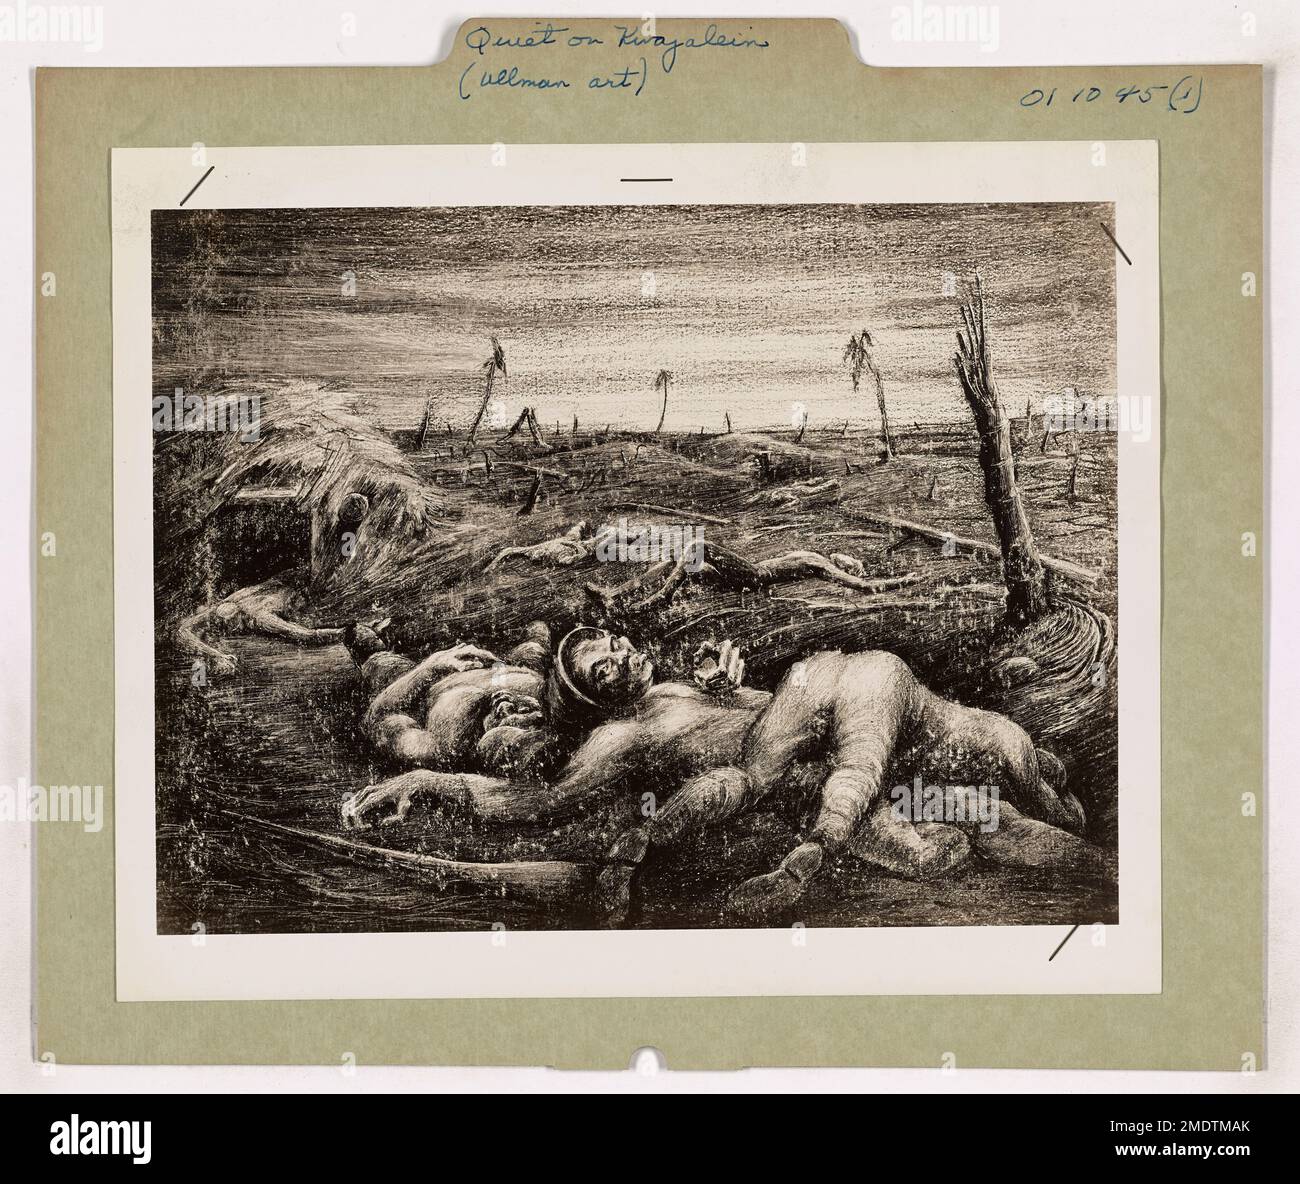 Quiet on Kwajalein. This image depicts dead Japanese soldiers scattered on the beach of Kwajalein Atoll in the Marshall Islands, drawn by Coast Guard Combat Artist Roland G. Ullman. Stock Photo